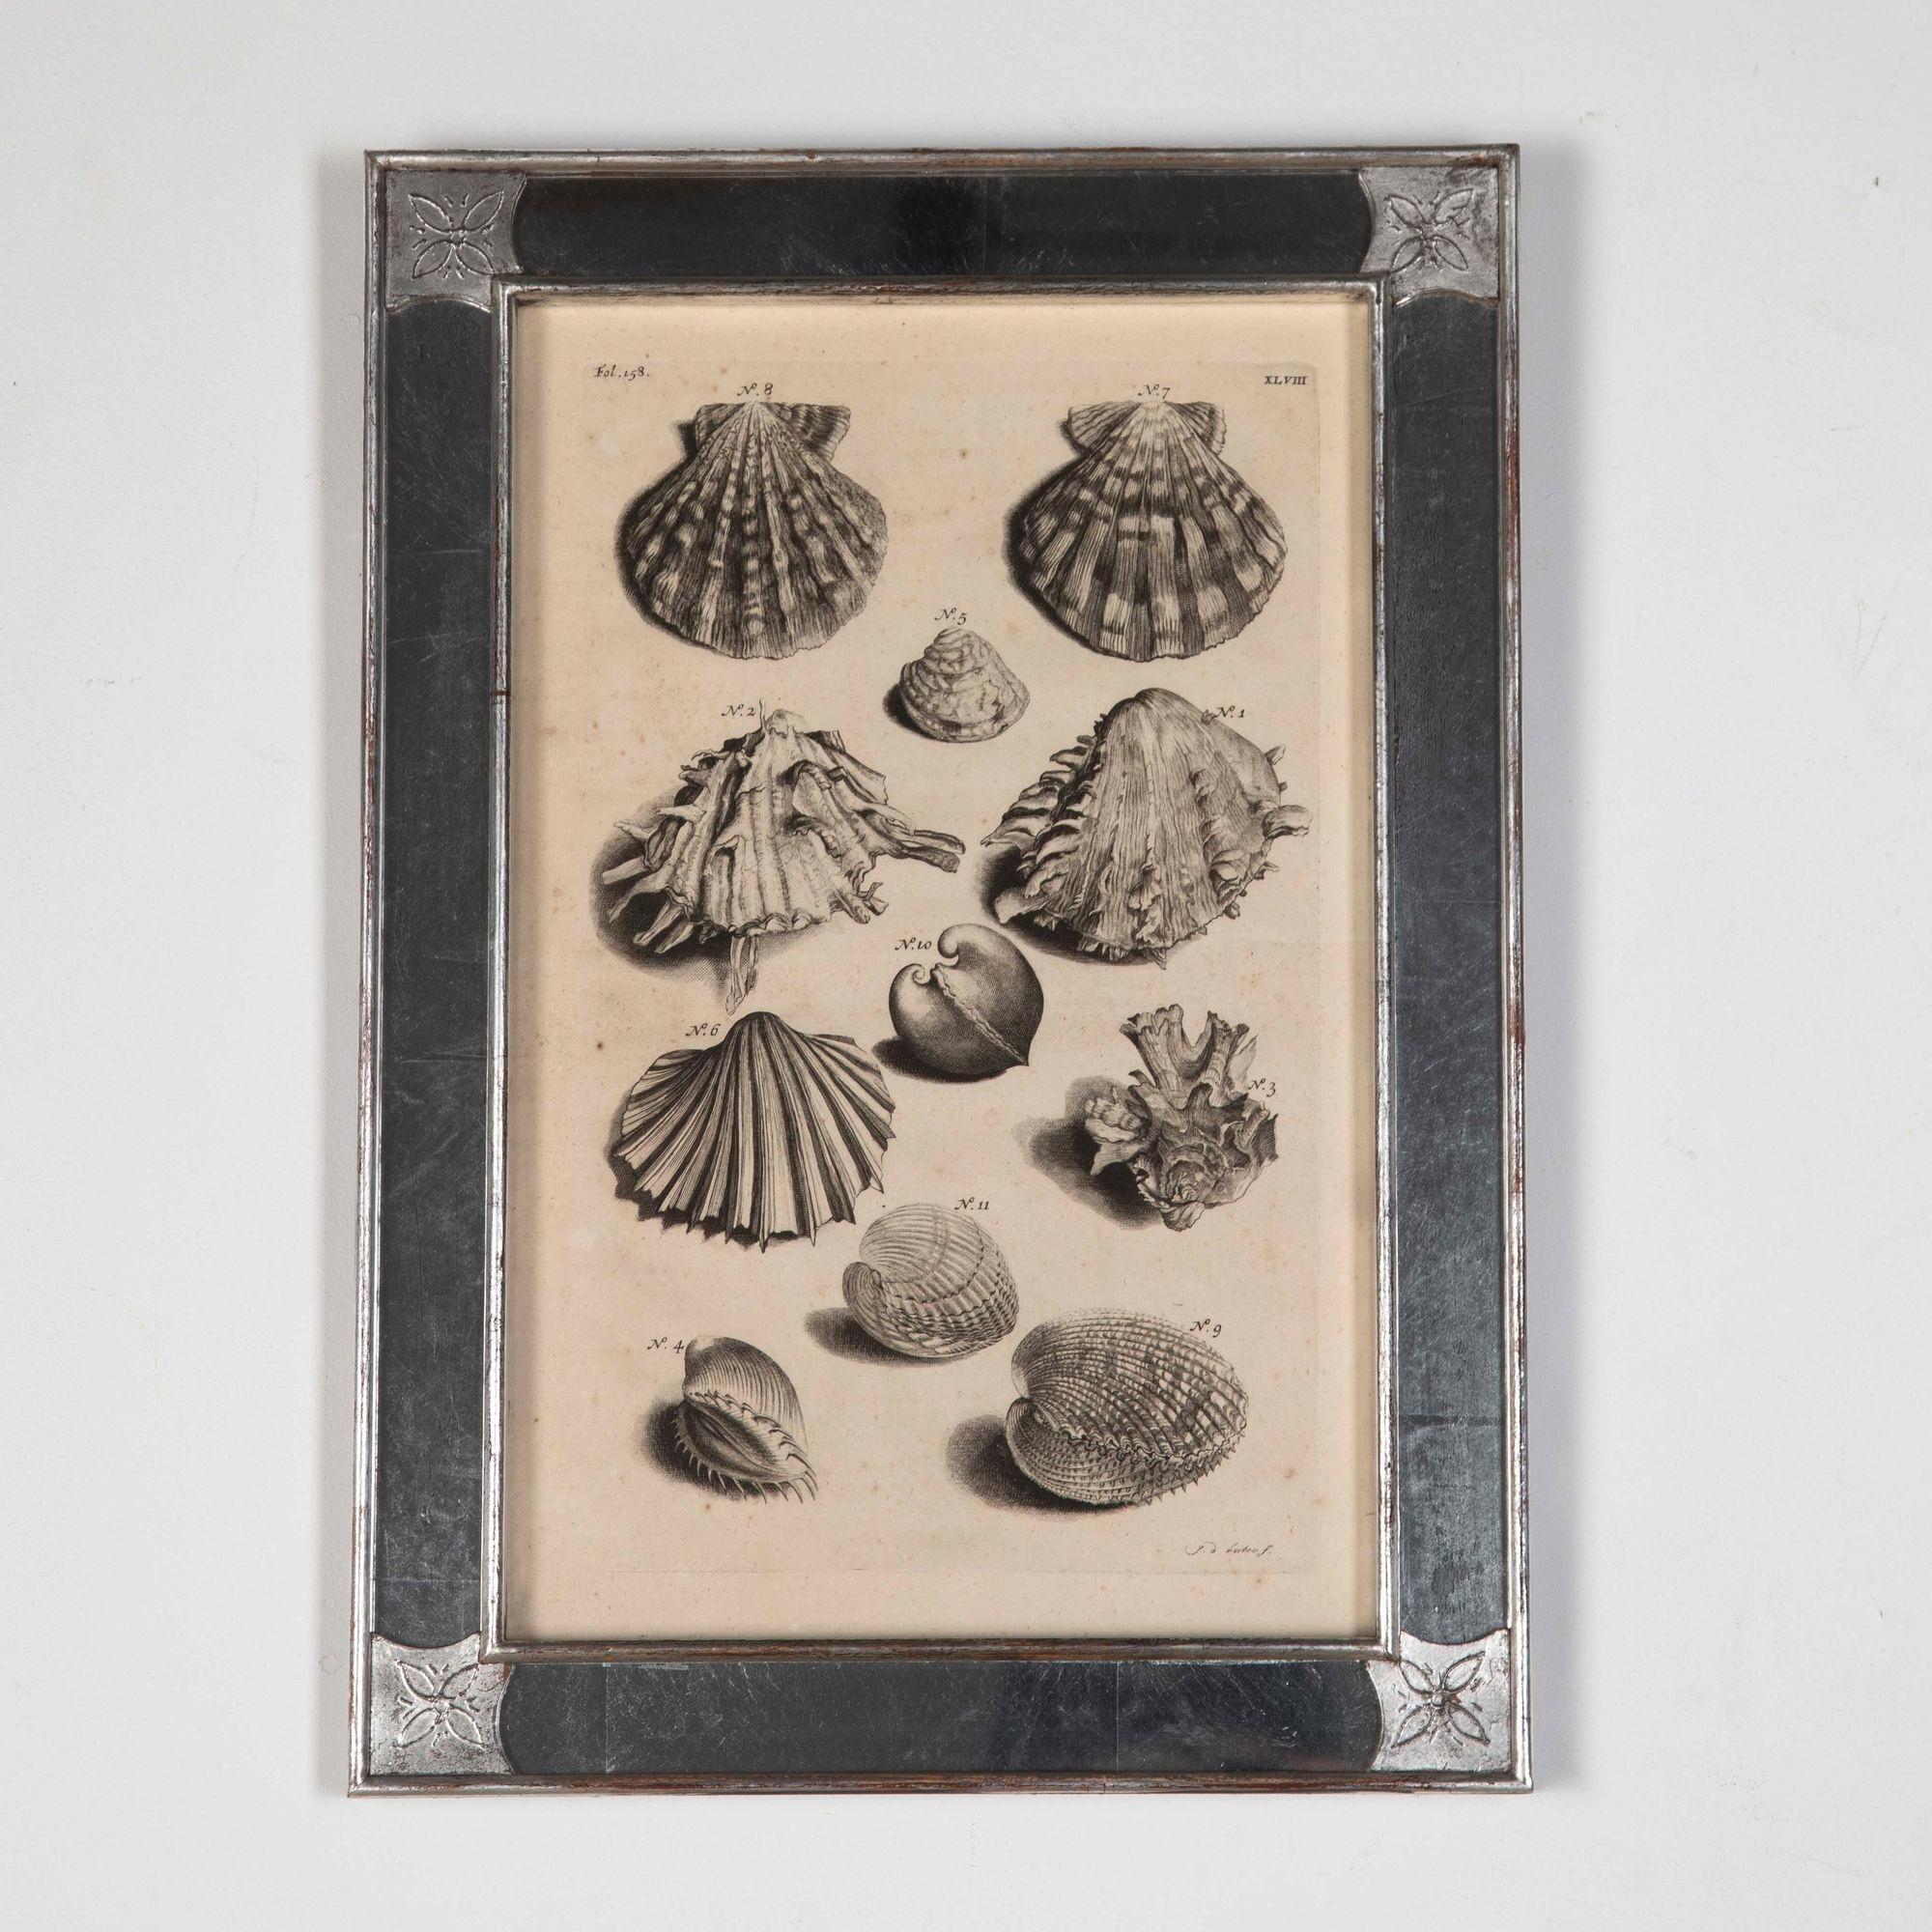 Set of nine original 18th century Dutch monochrome engravings of shells by Georg Eberhard Rumphius.
These engravings are originally from the Thesaurus Imaginum Piscium Testaceorum, Amsterdam. 
Presented in hand-decorated silver-gilt/mirrored